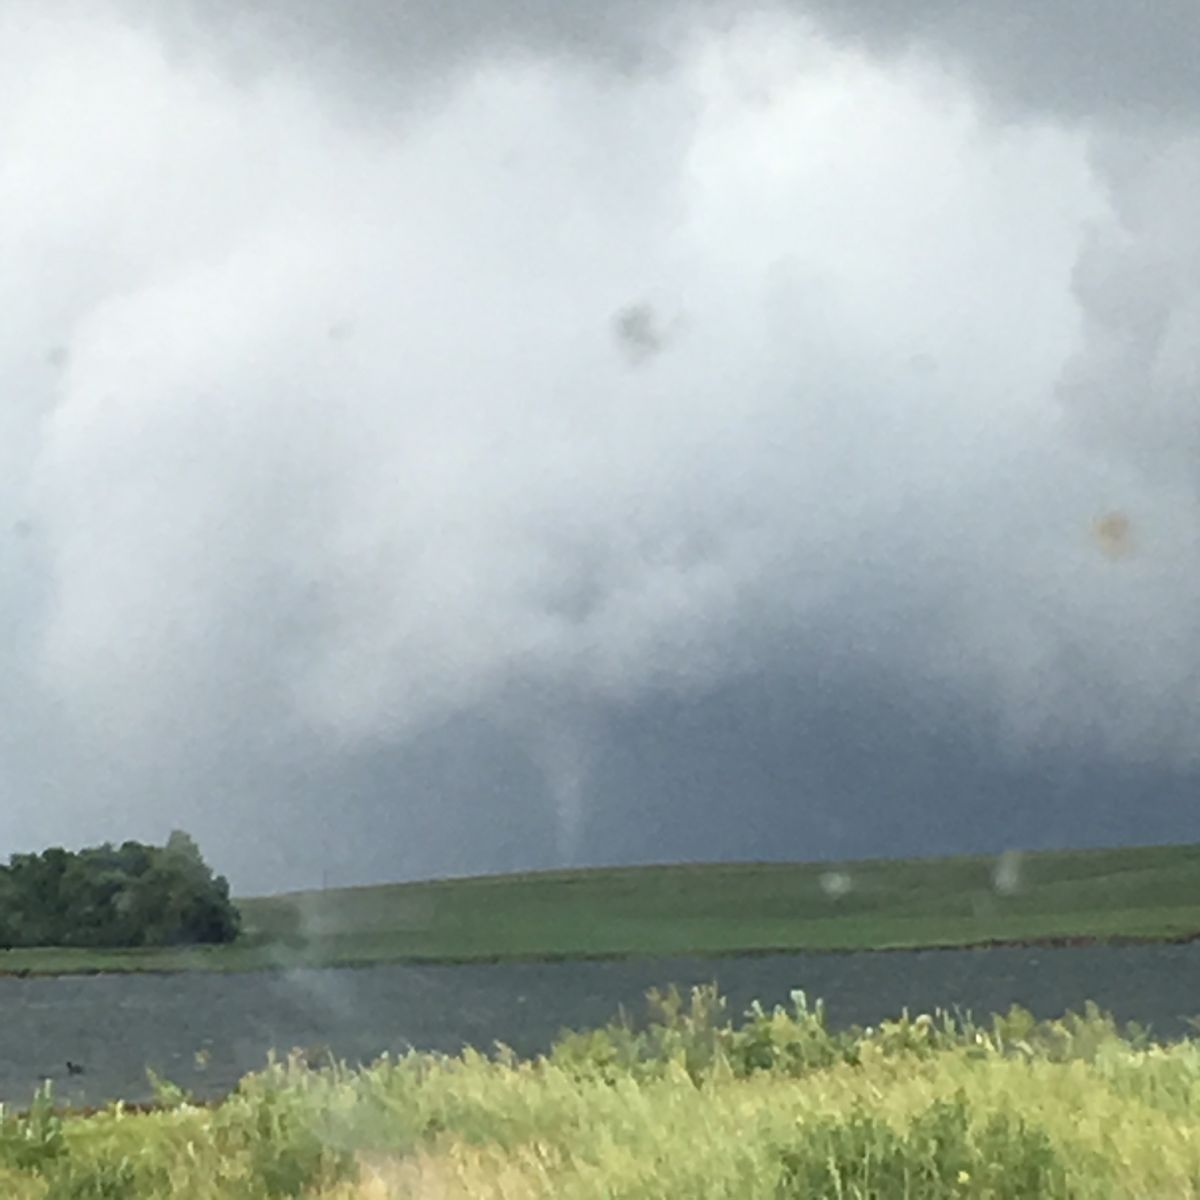 Photo taken on Highway 12 west of Webster by Marie Johnson at 2:43 PM CDT (looking North-Northeast)